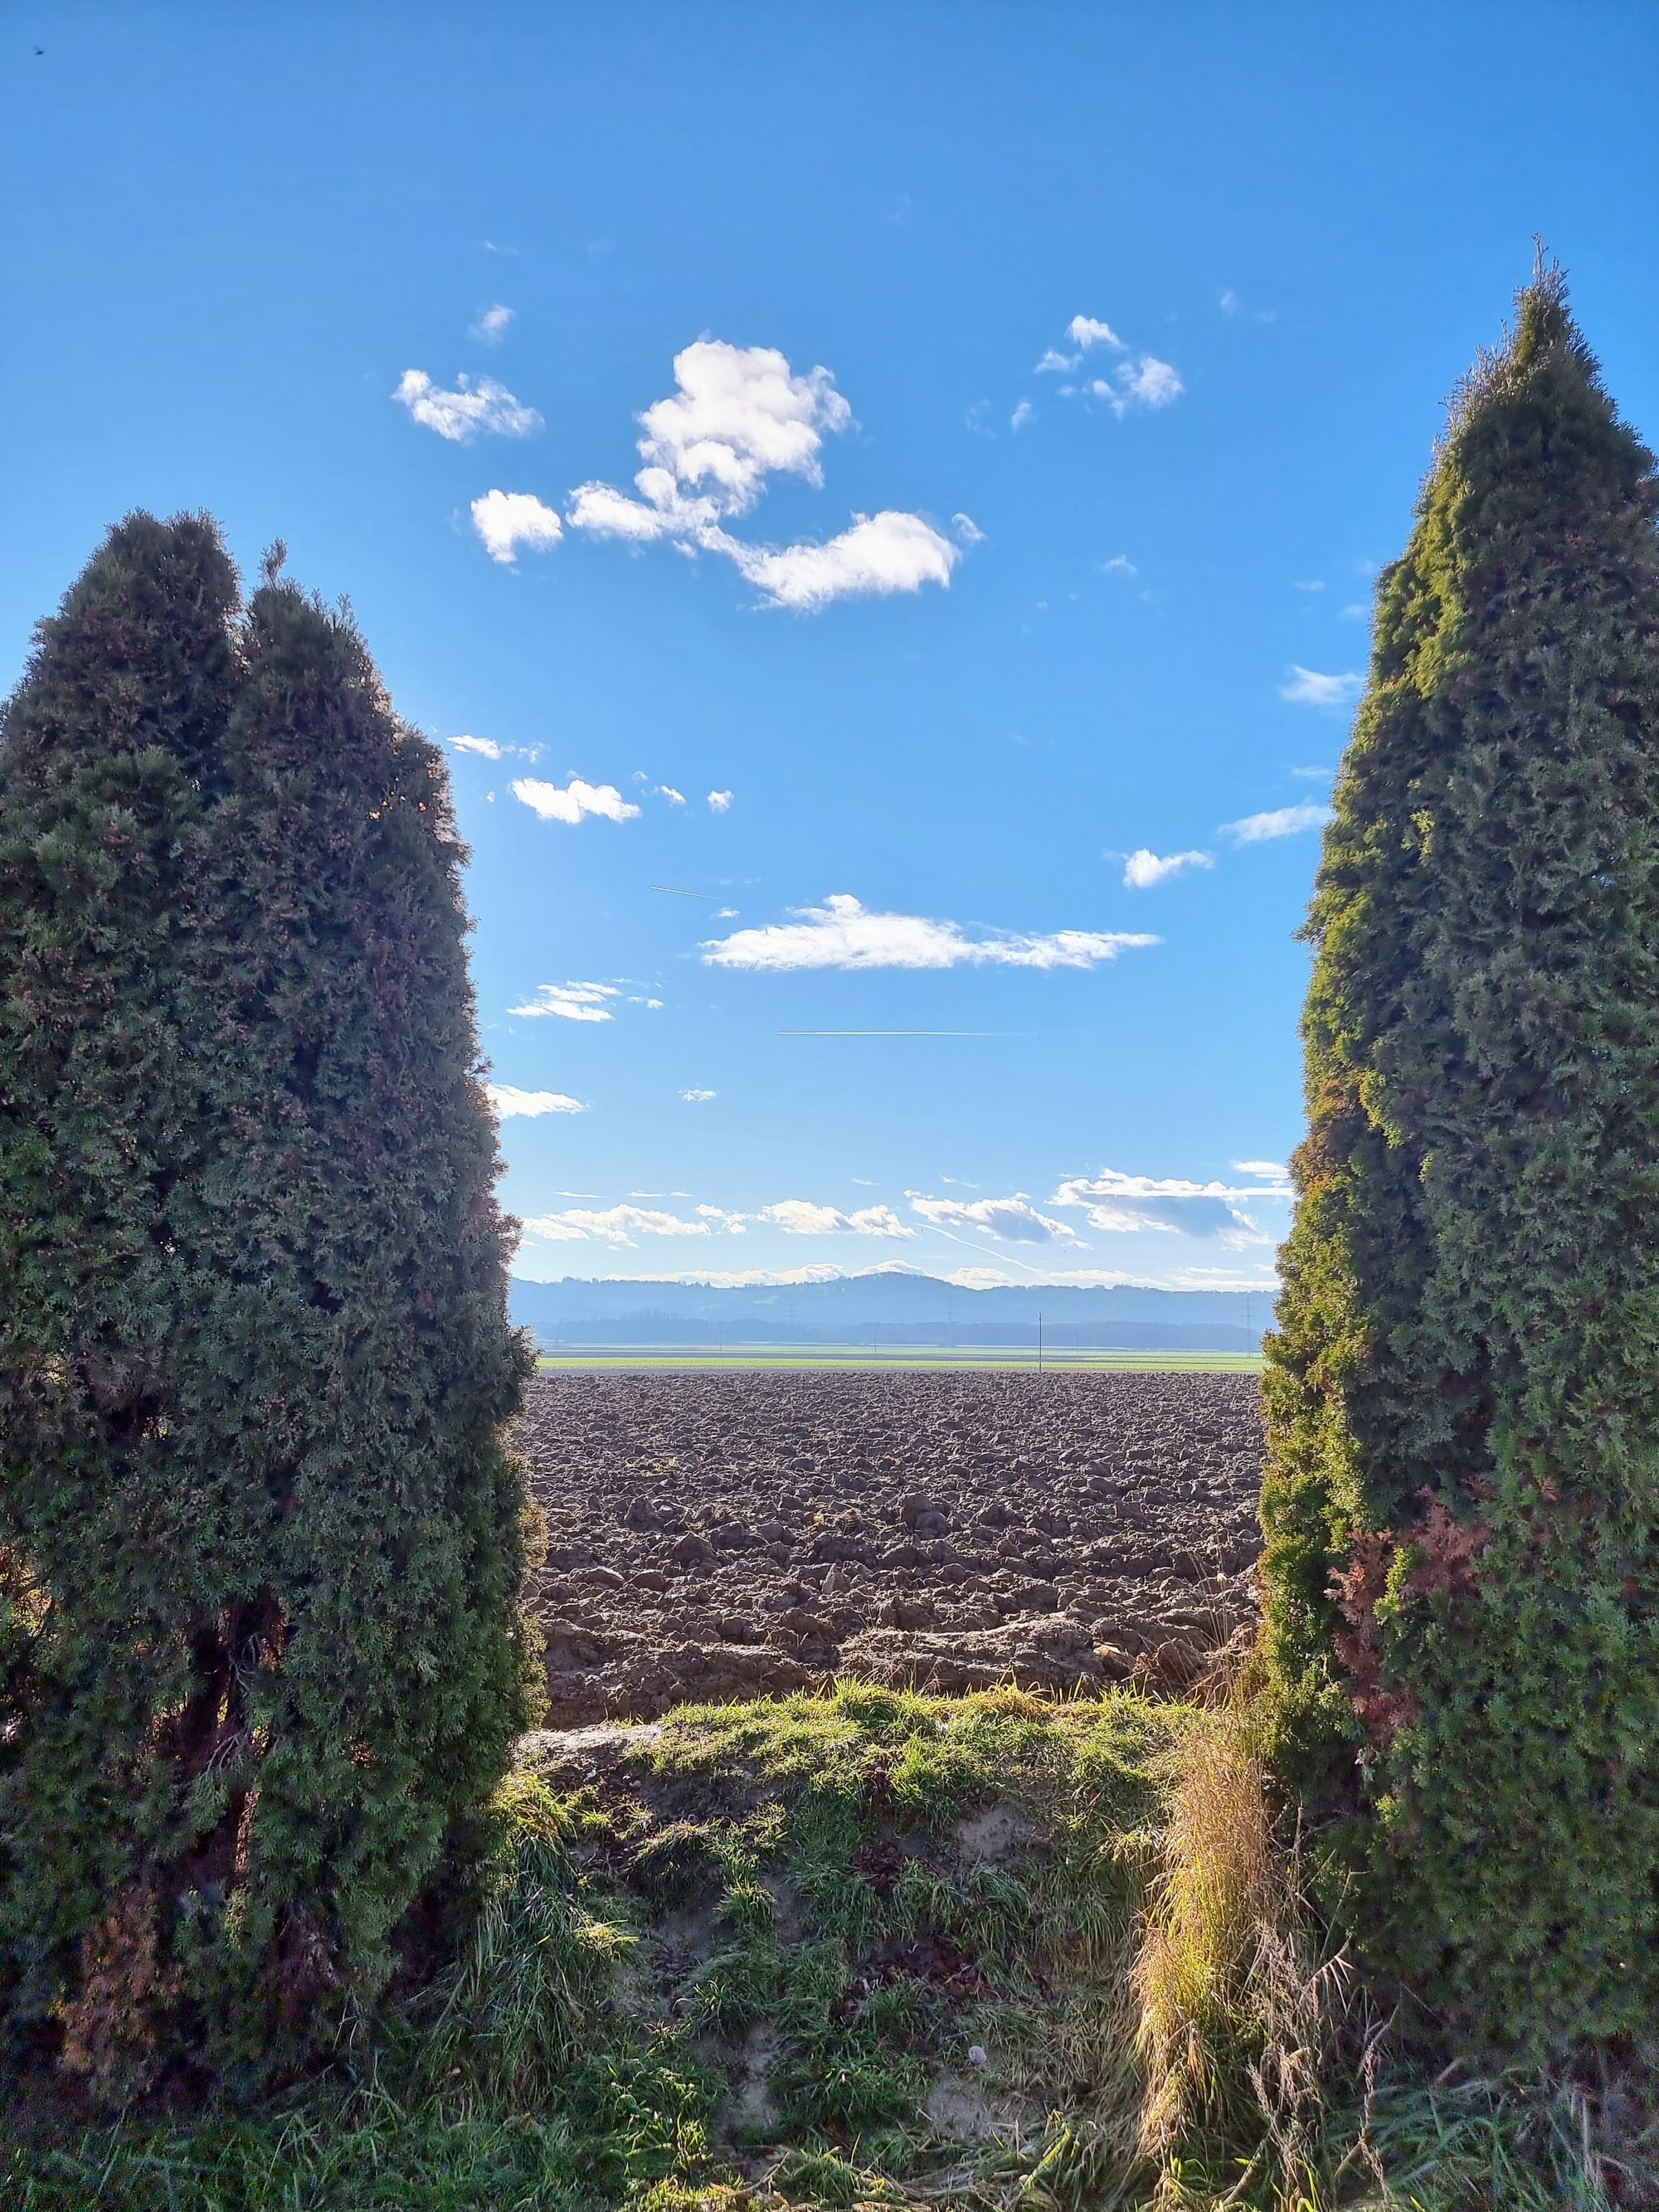 View of blue skies and a plowed field, from between two tall thujas